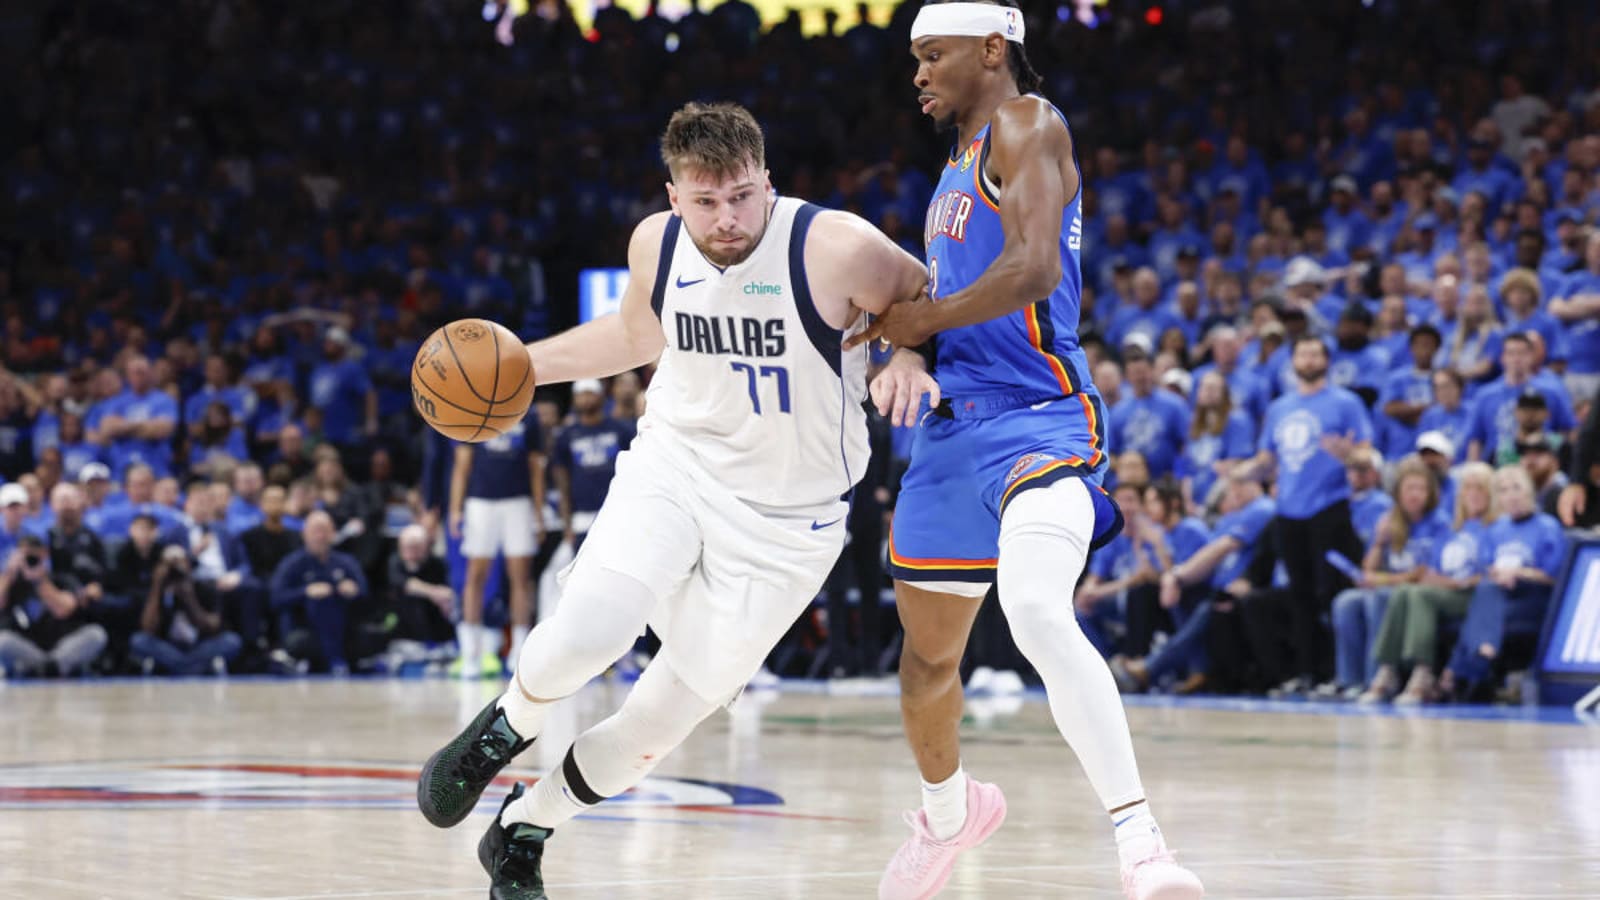 Luka Doncic says Thunder fan called out his family during Game 2: 'I don't like that'